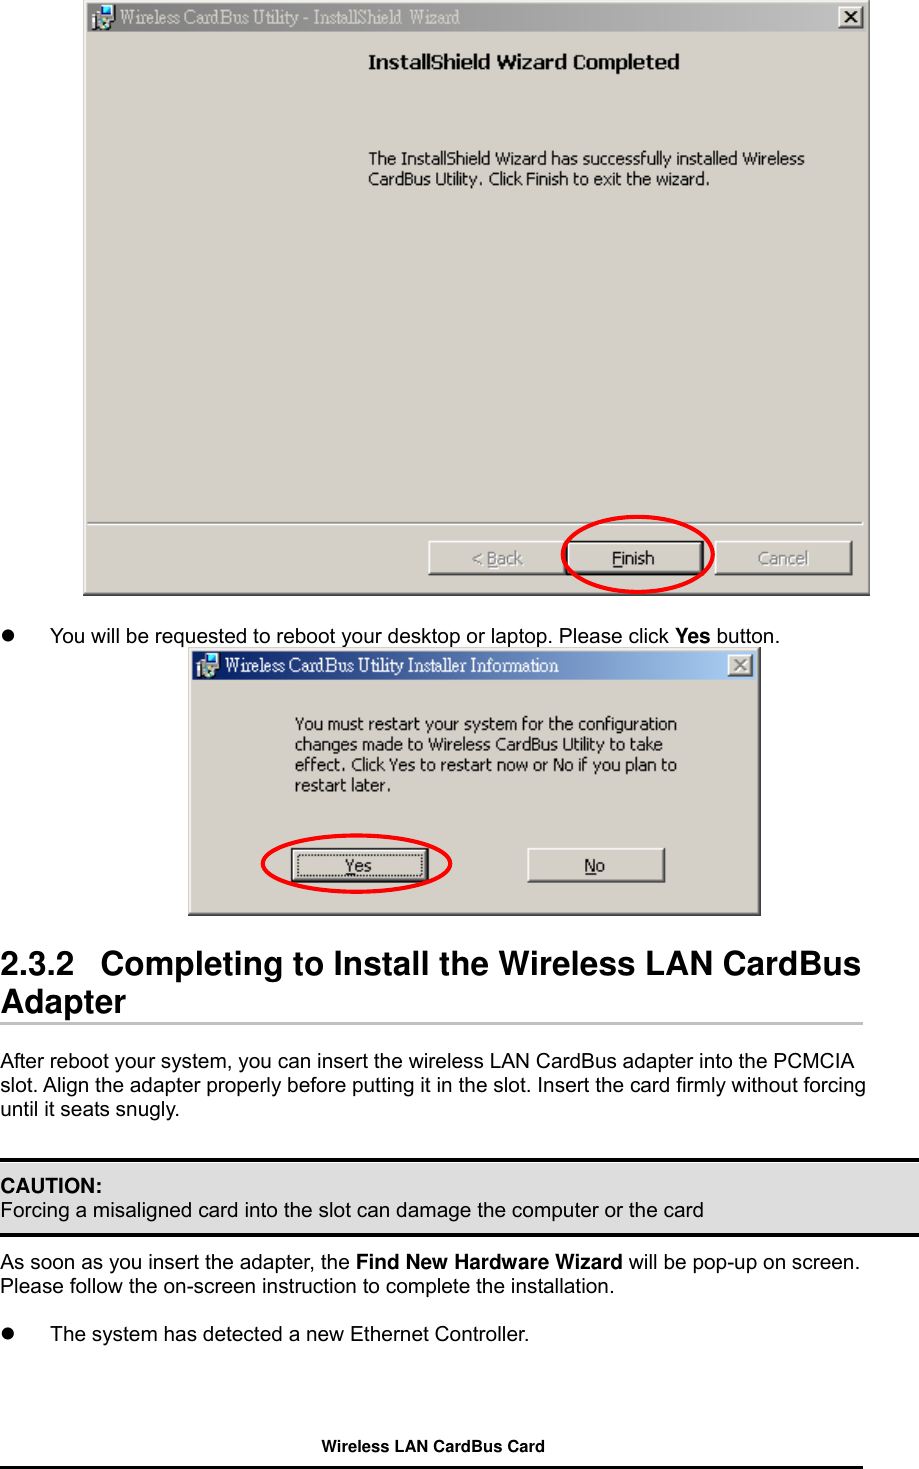     You will be requested to reboot your desktop or laptop. Please click Yes button.    2.3.2   Completing to Install the Wireless LAN CardBus Adapter  After reboot your system, you can insert the wireless LAN CardBus adapter into the PCMCIA slot. Align the adapter properly before putting it in the slot. Insert the card firmly without forcing until it seats snugly.   CAUTION: Forcing a misaligned card into the slot can damage the computer or the card    As soon as you insert the adapter, the Find New Hardware Wizard will be pop-up on screen.   Please follow the on-screen instruction to complete the installation.    The system has detected a new Ethernet Controller. Wireless LAN CardBus Card 